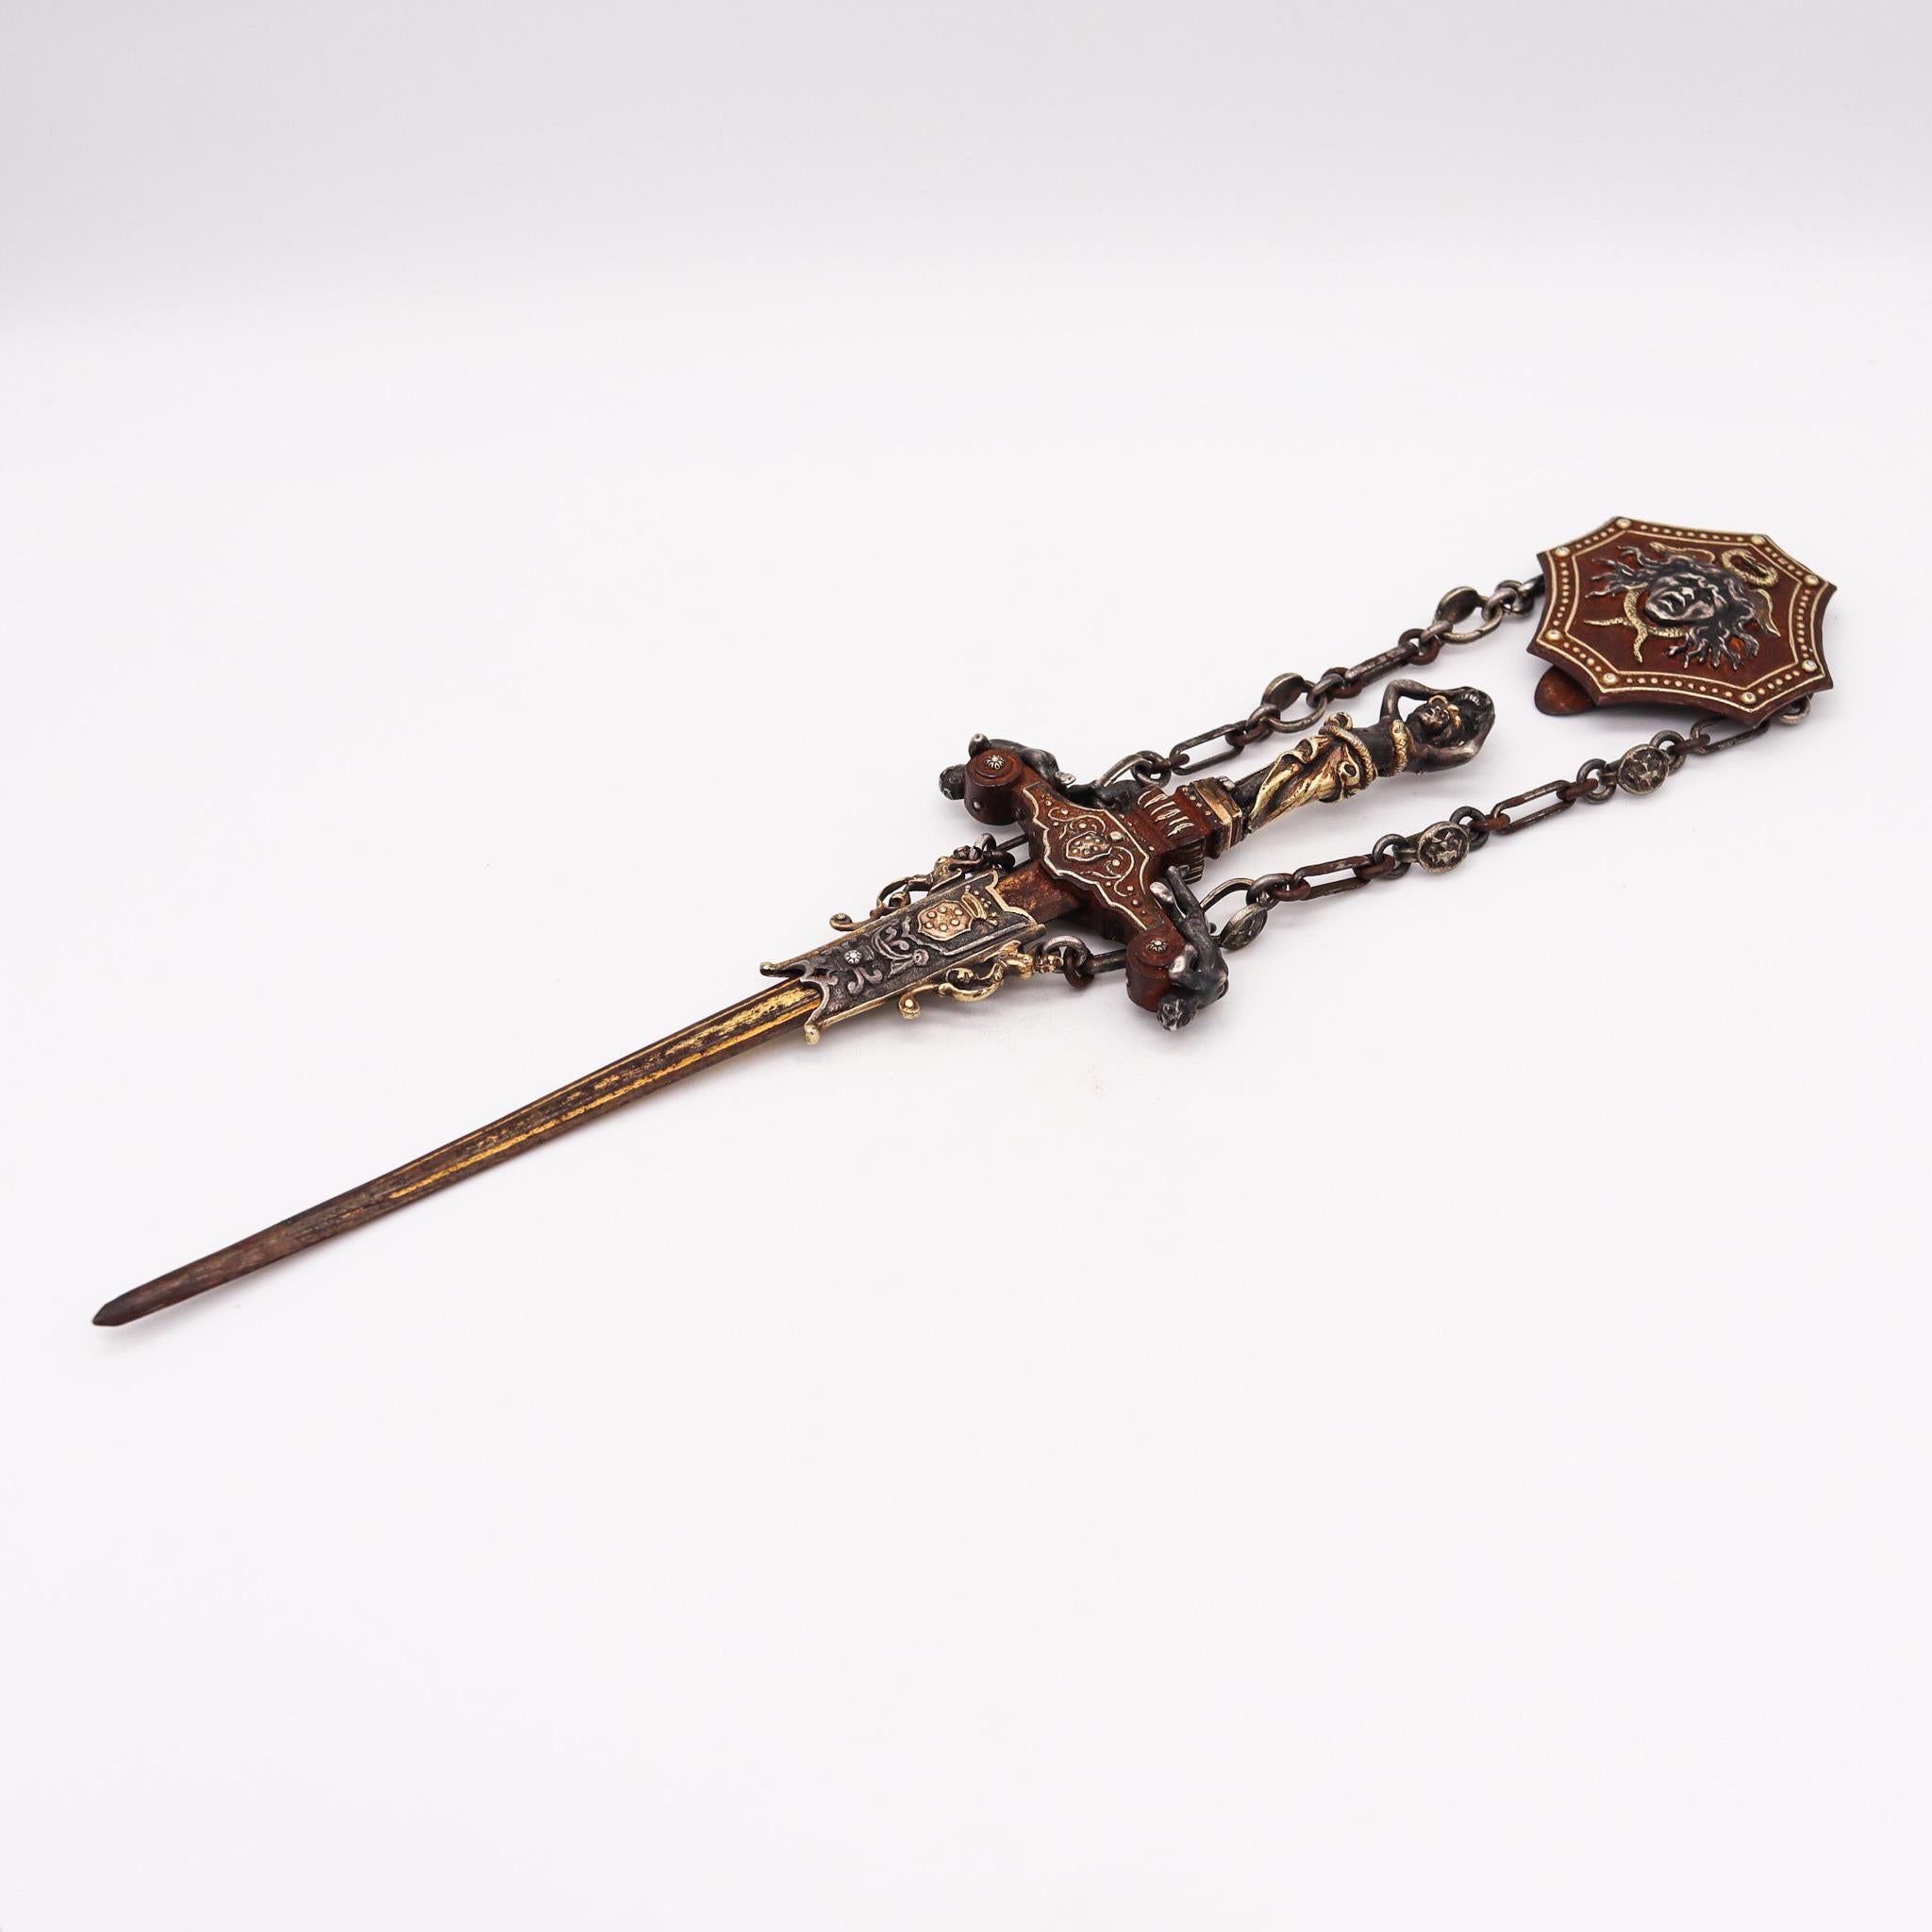 A 19th century Stiletto Dagger made in Florence

An exceptional antique early 19th century Italian Florentine stiletto dagger with a beautifully and extremely well forged details. Made up in iron, .800 silver and .750 gold with accents in gold